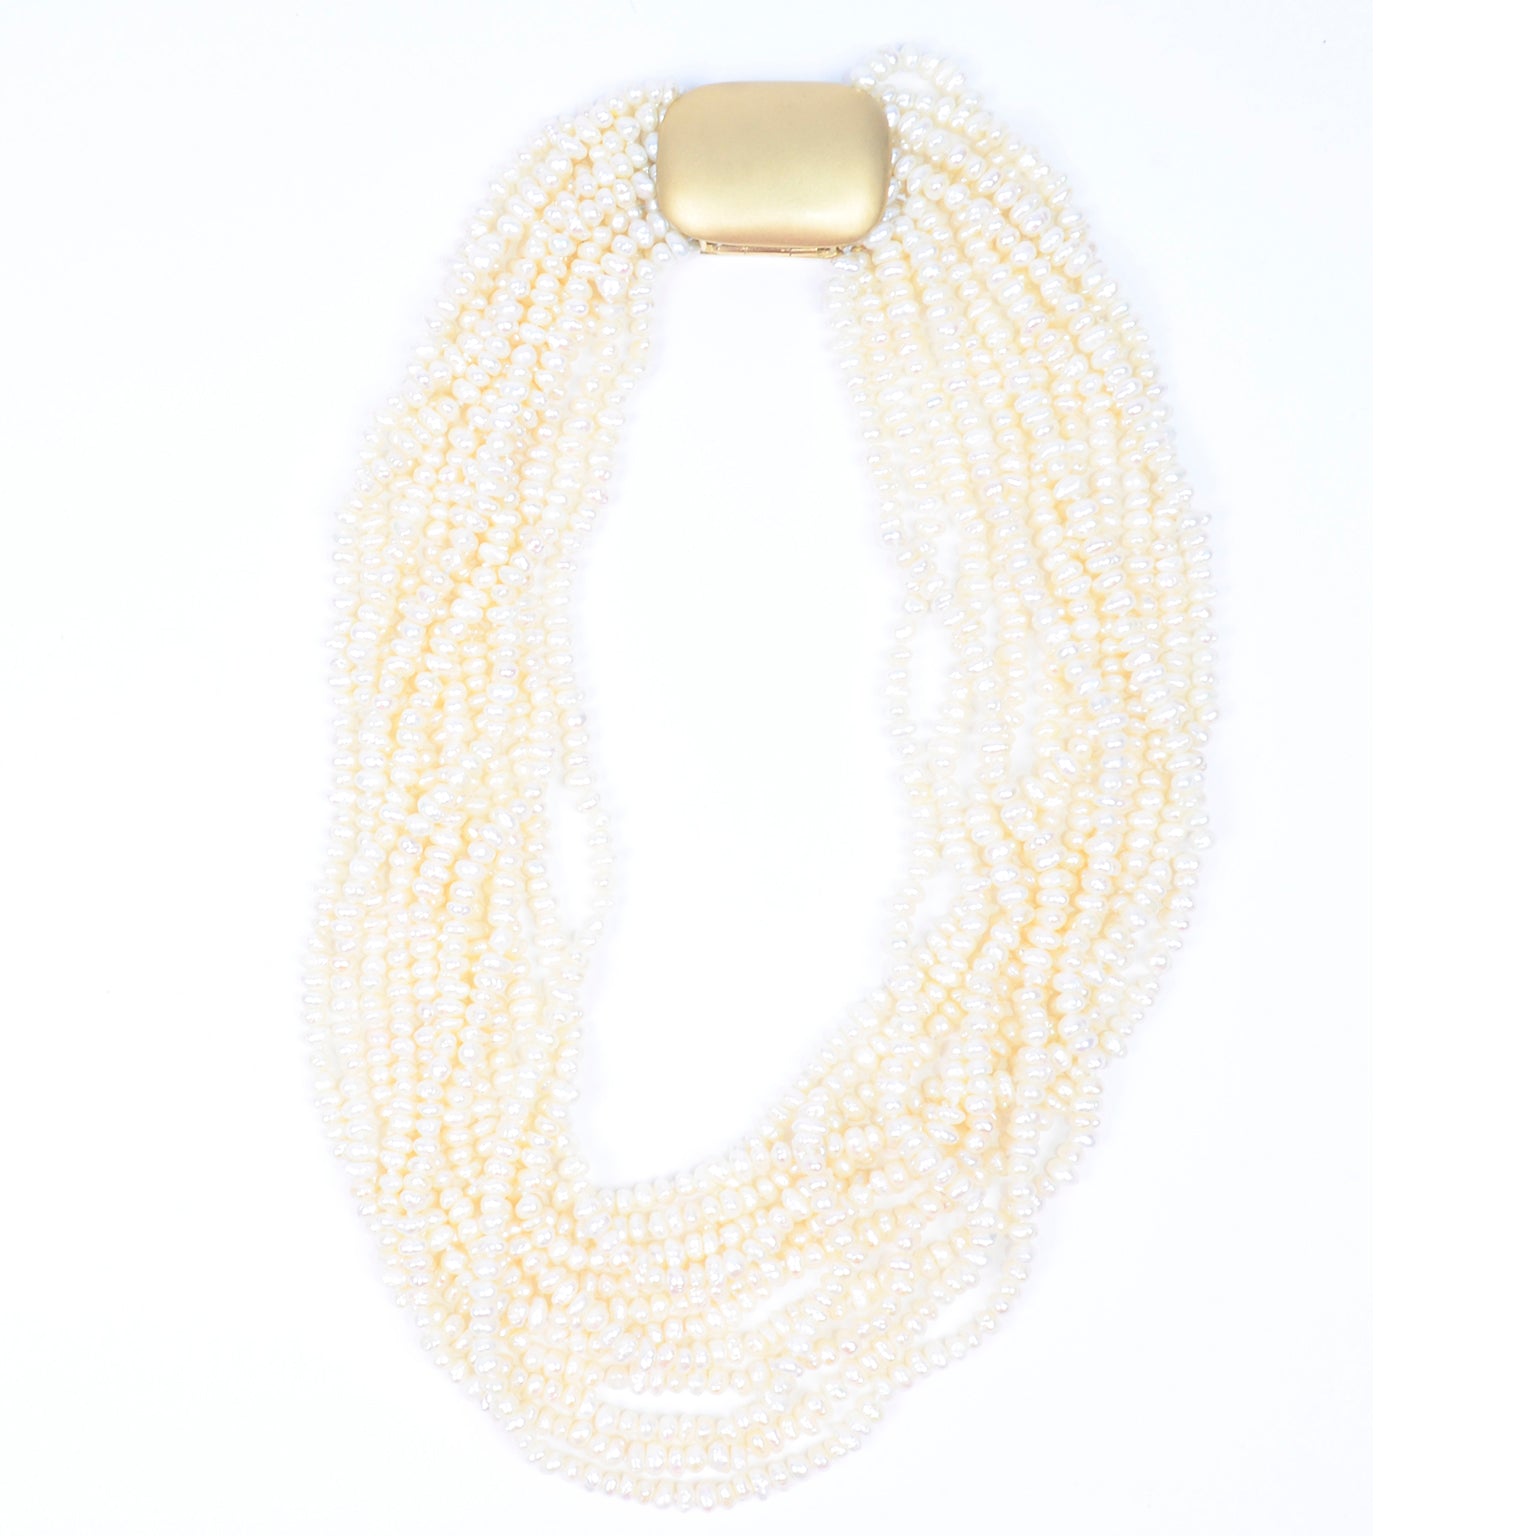 Issey 18K Gold Freshwater Pearl Necklace